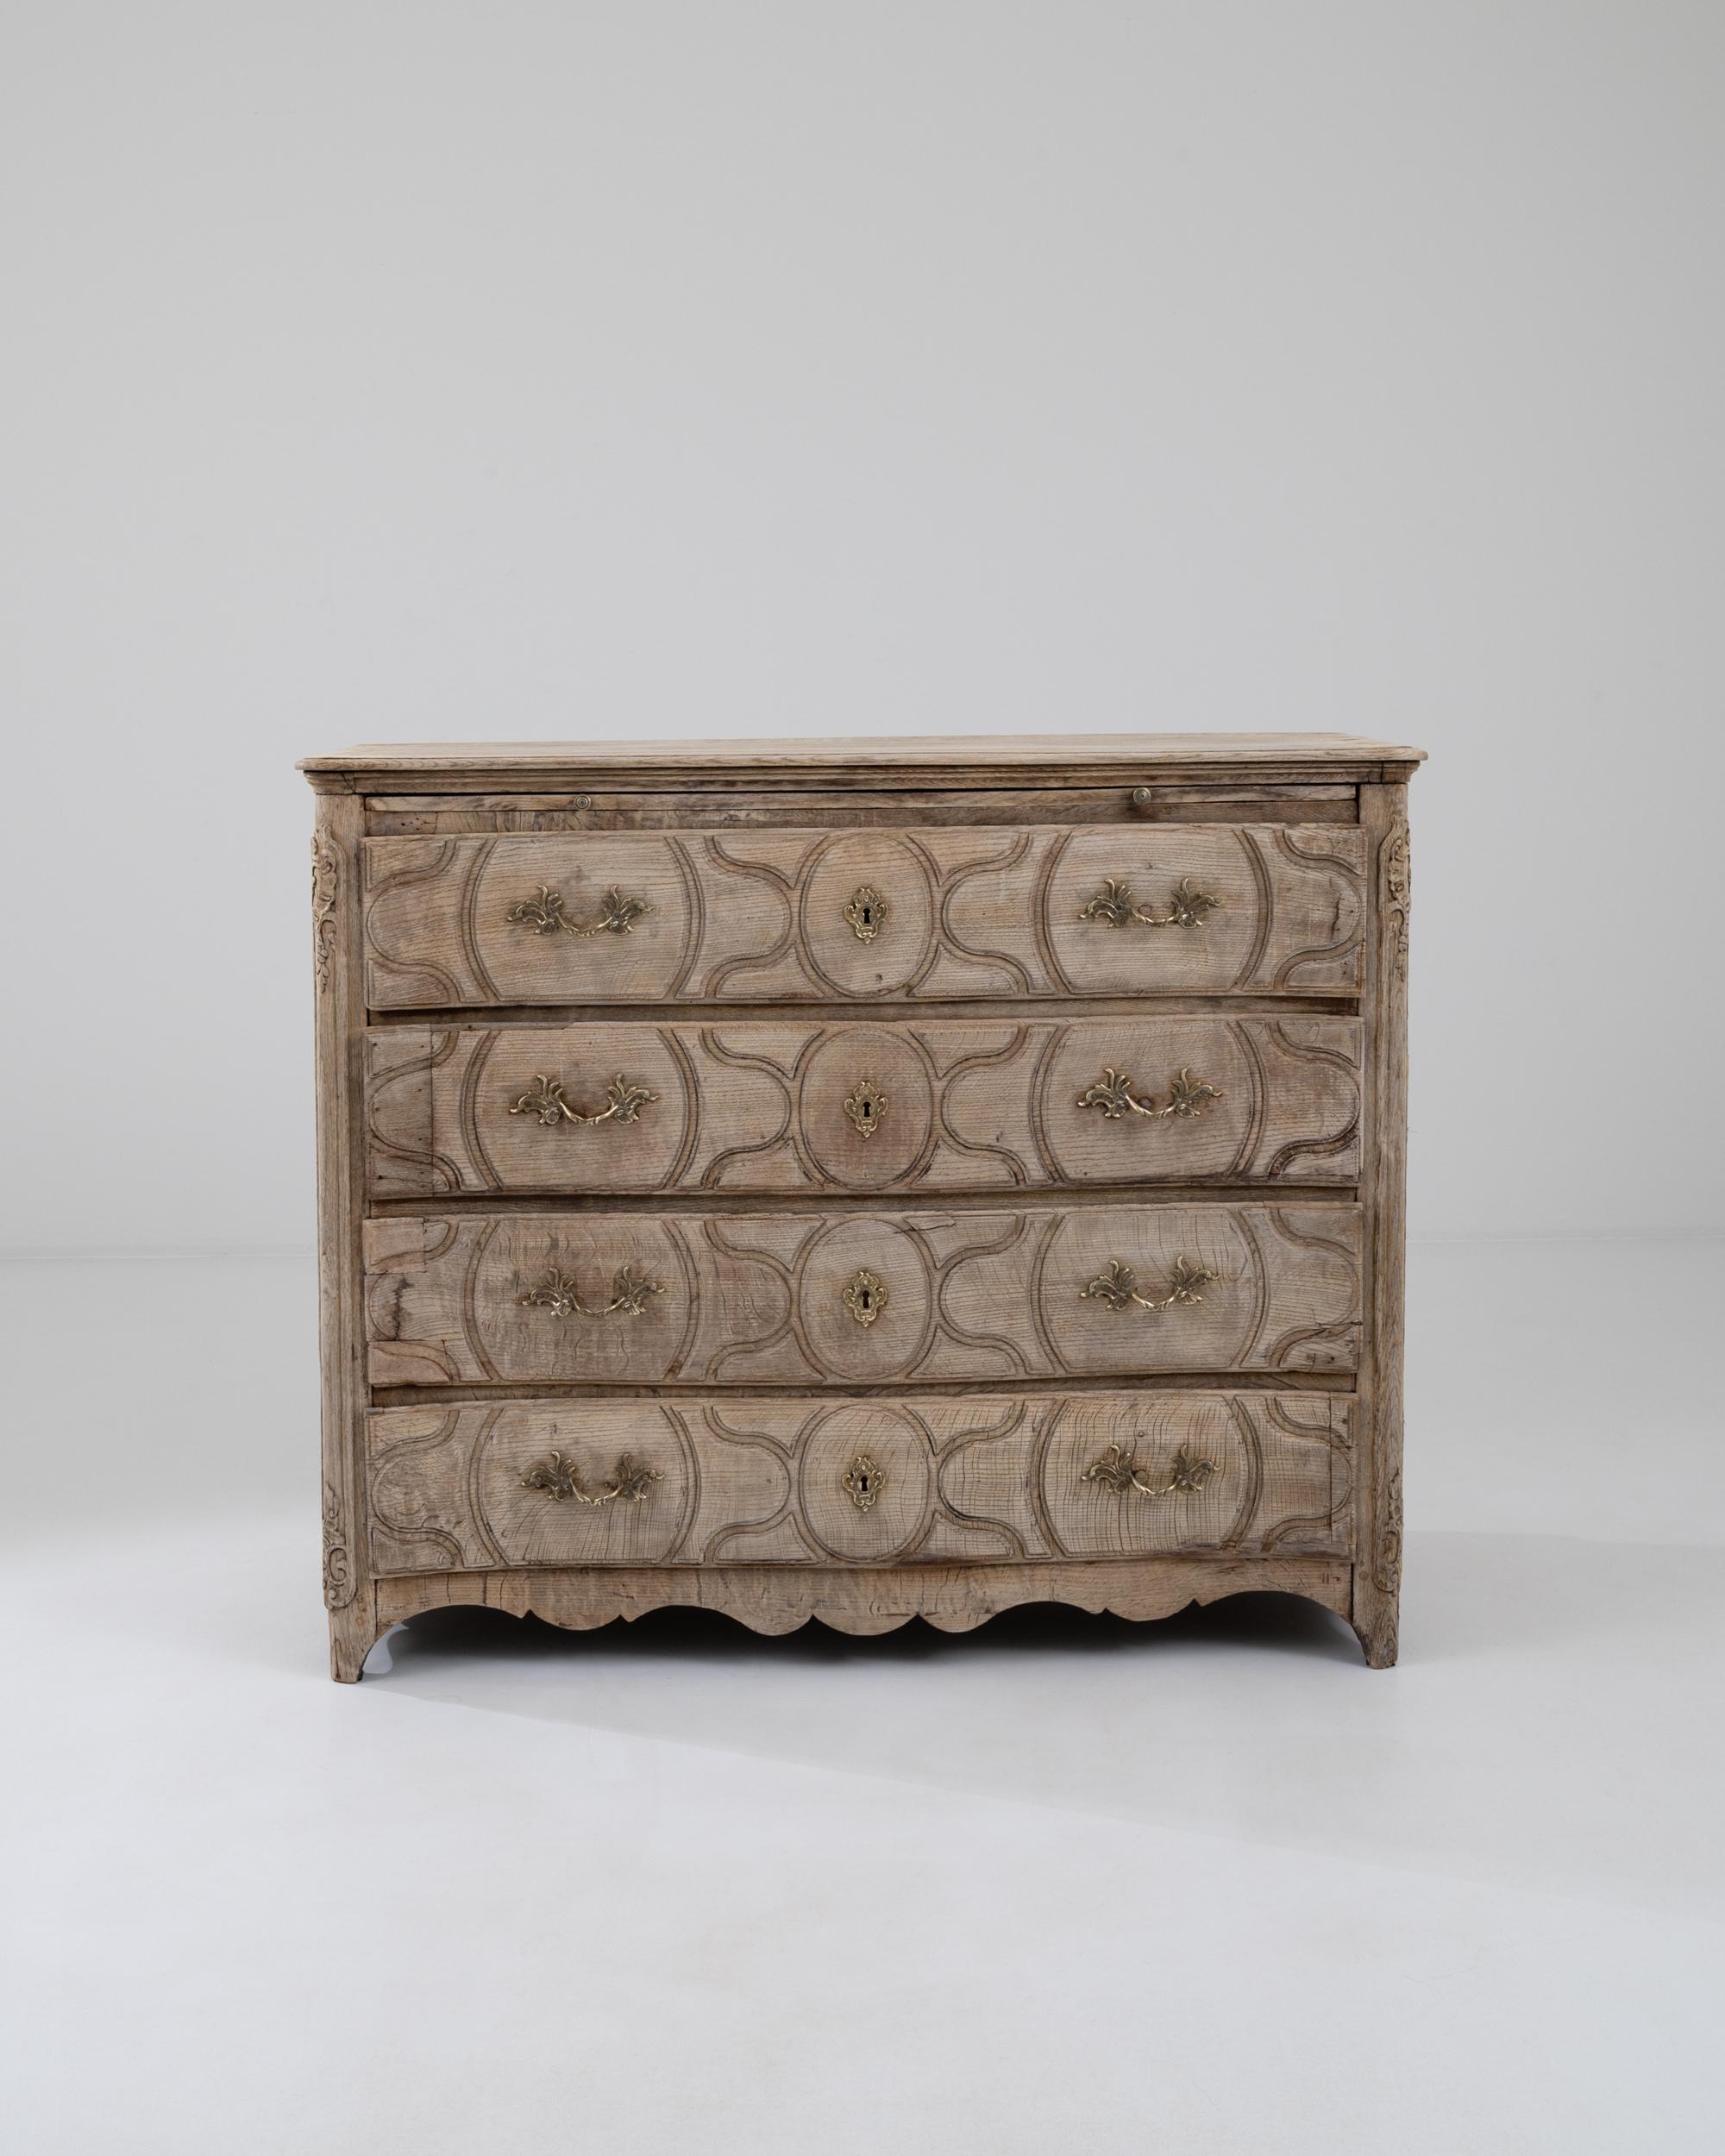 Built during the 19th century in France, this sturdy bleached oak dresser showcases four spacious drawers adorned with distinctive serpentine patterns. The meticulously carved ornate elements on the sides of the chest beautifully complement the